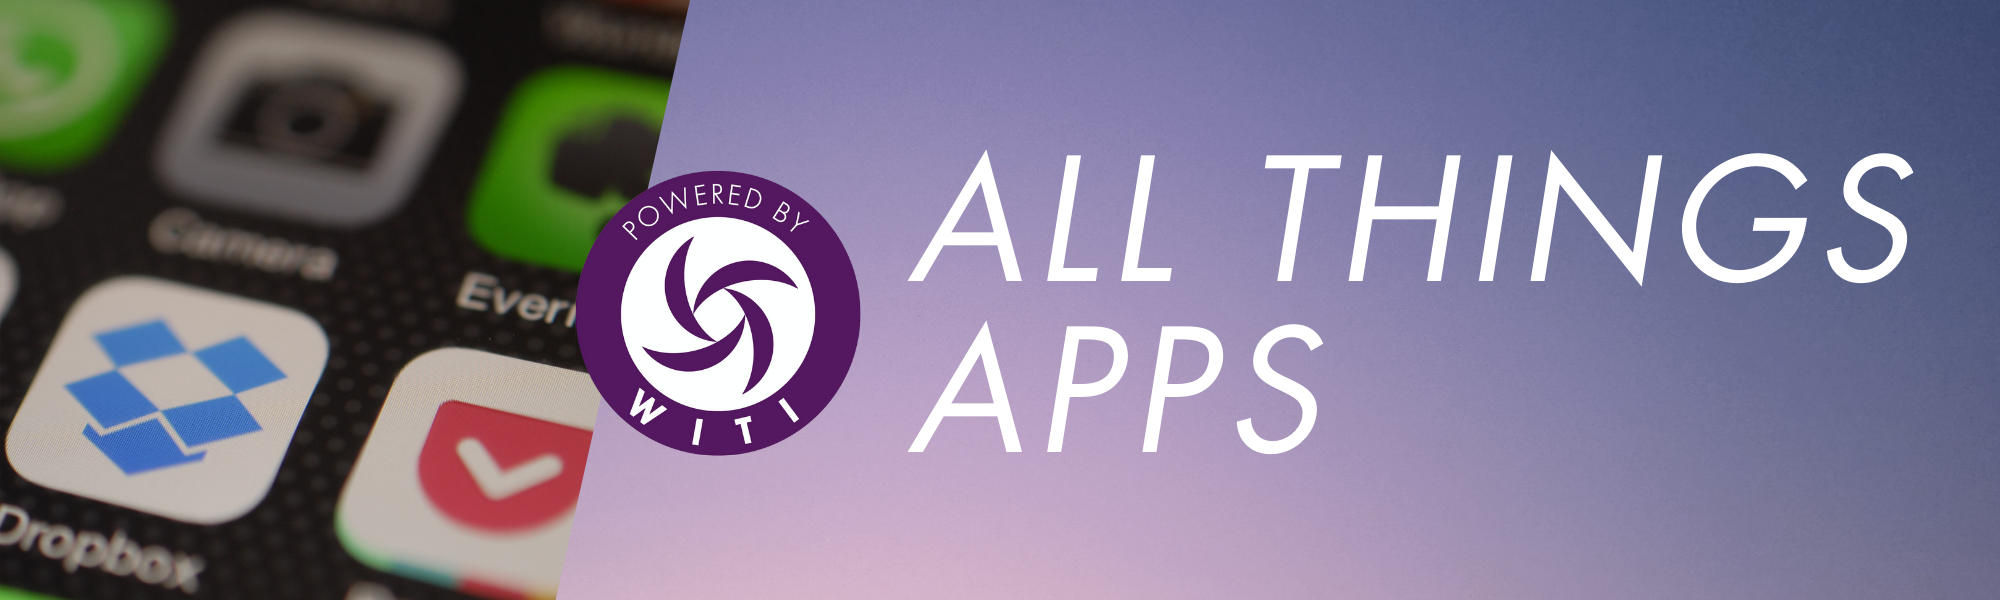 All Things Apps